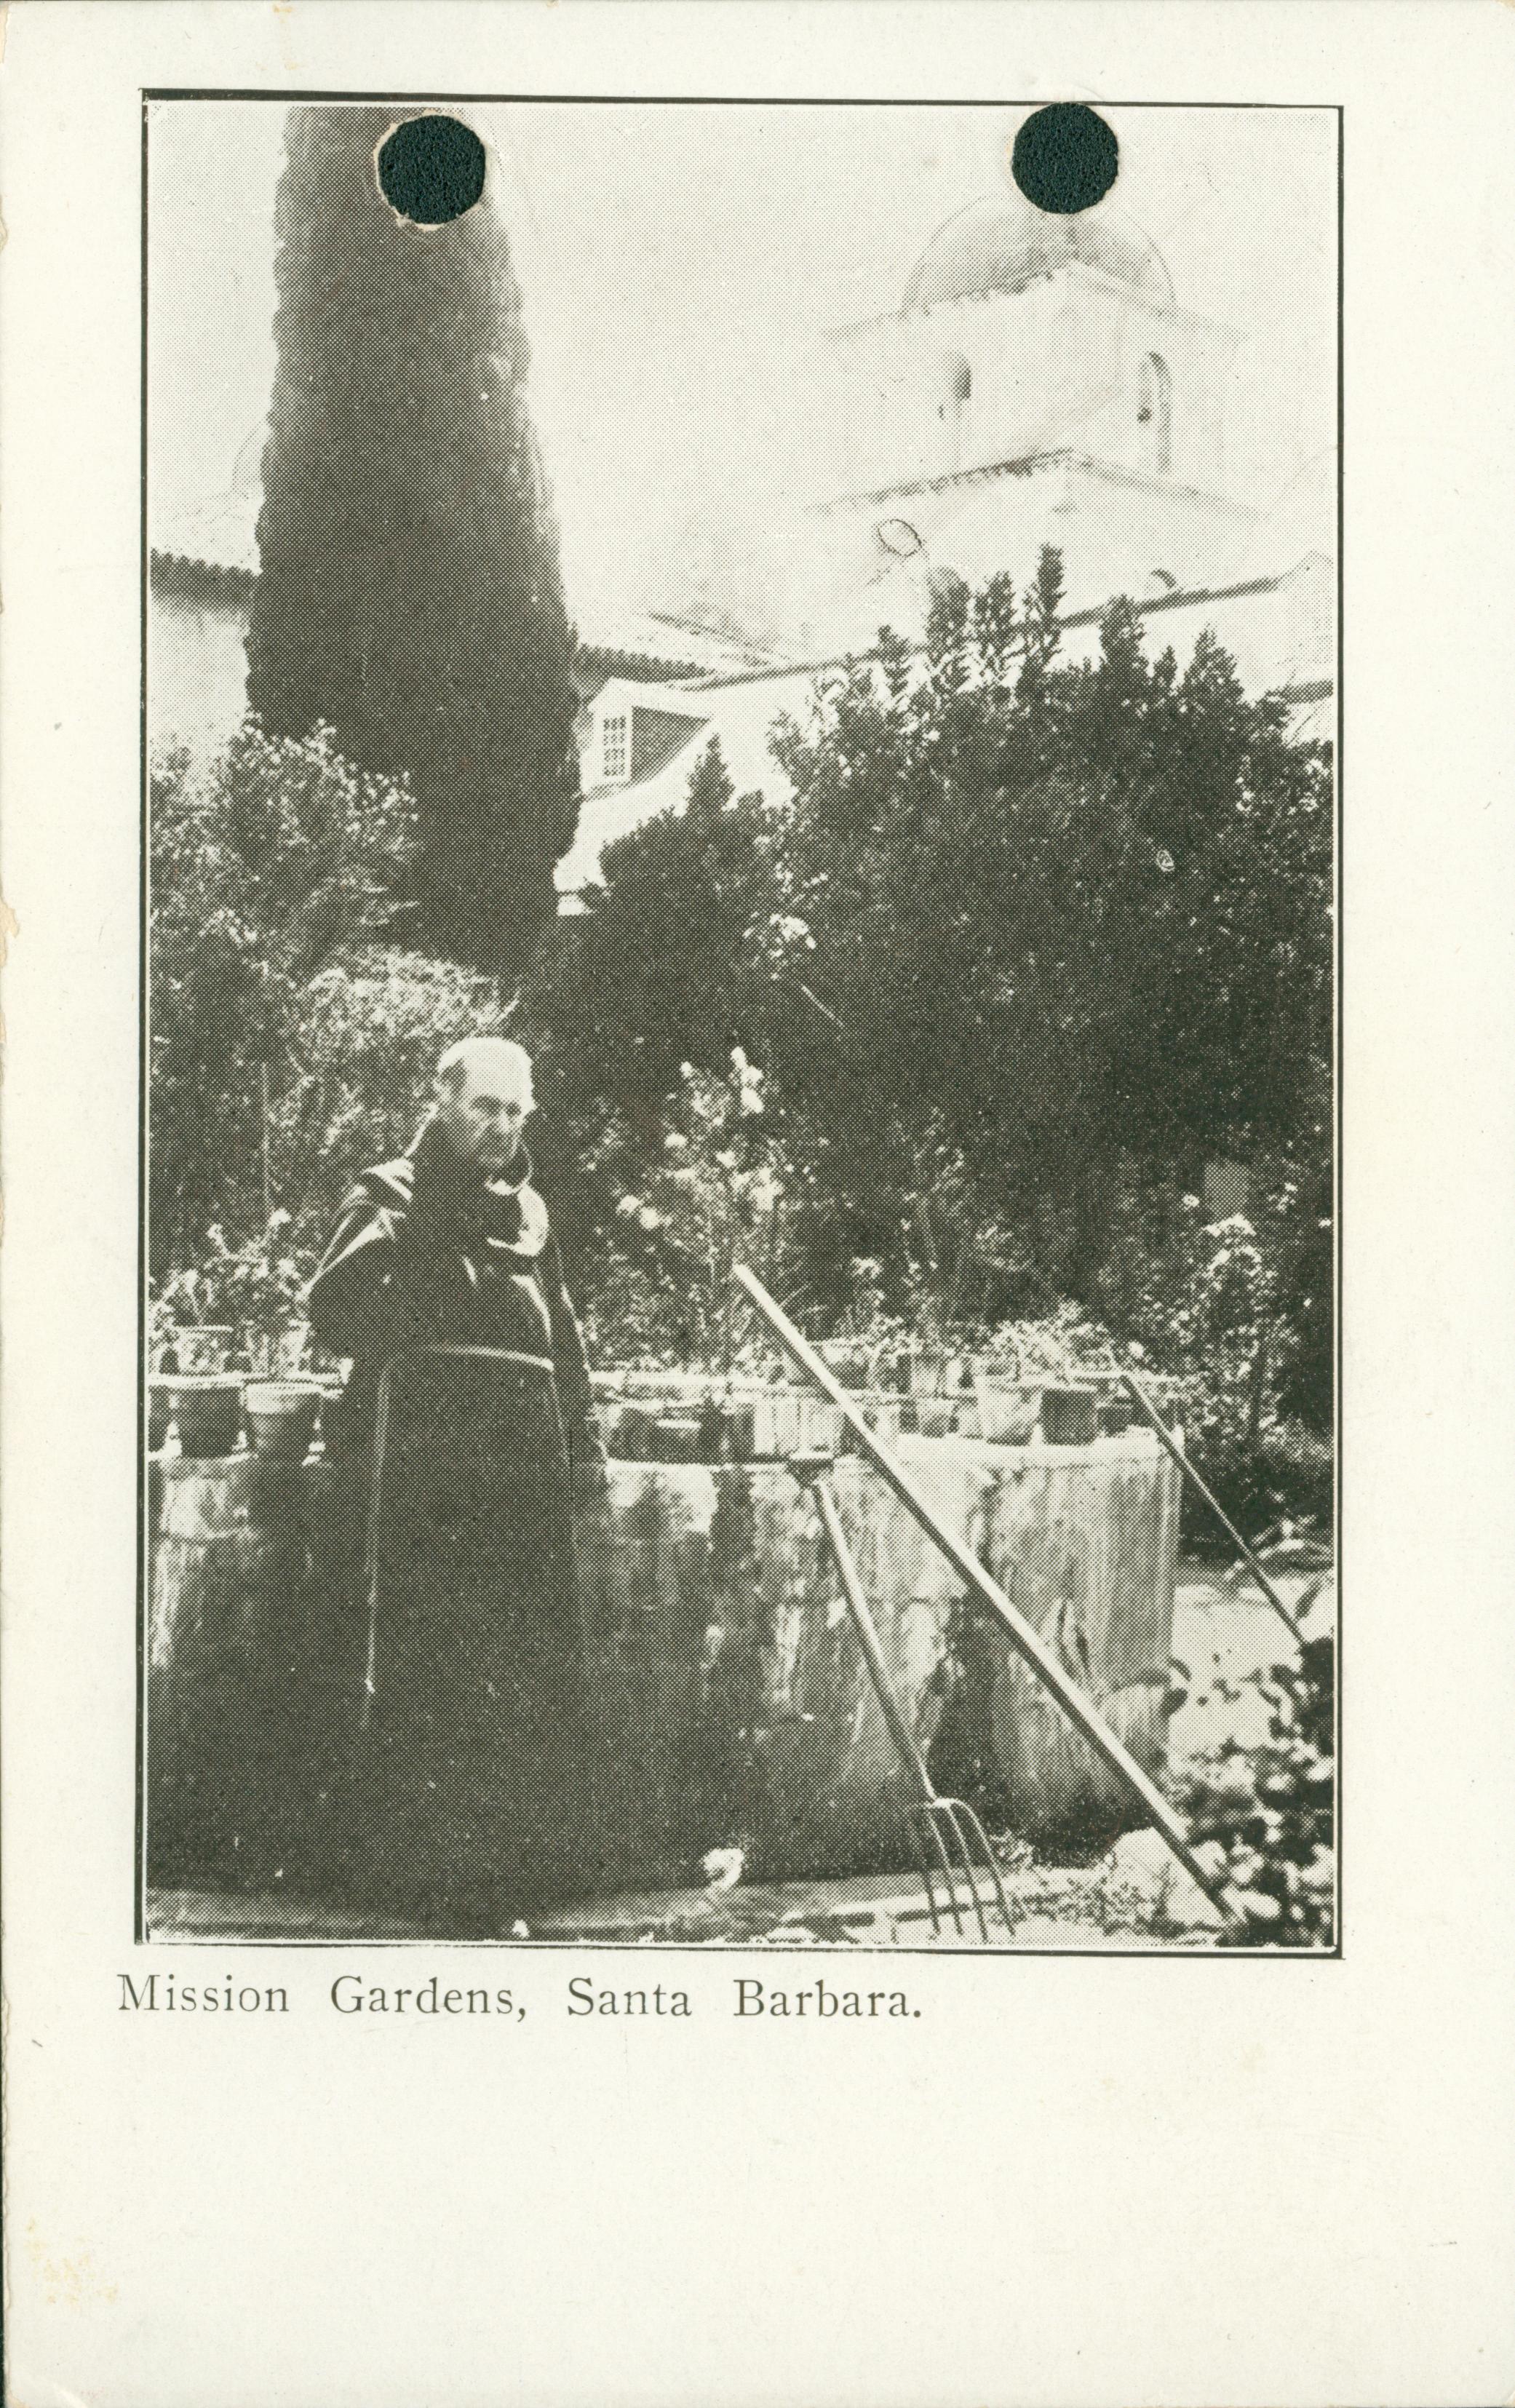 View of the gardens of Mission Santa Barbara, monk working in the garden